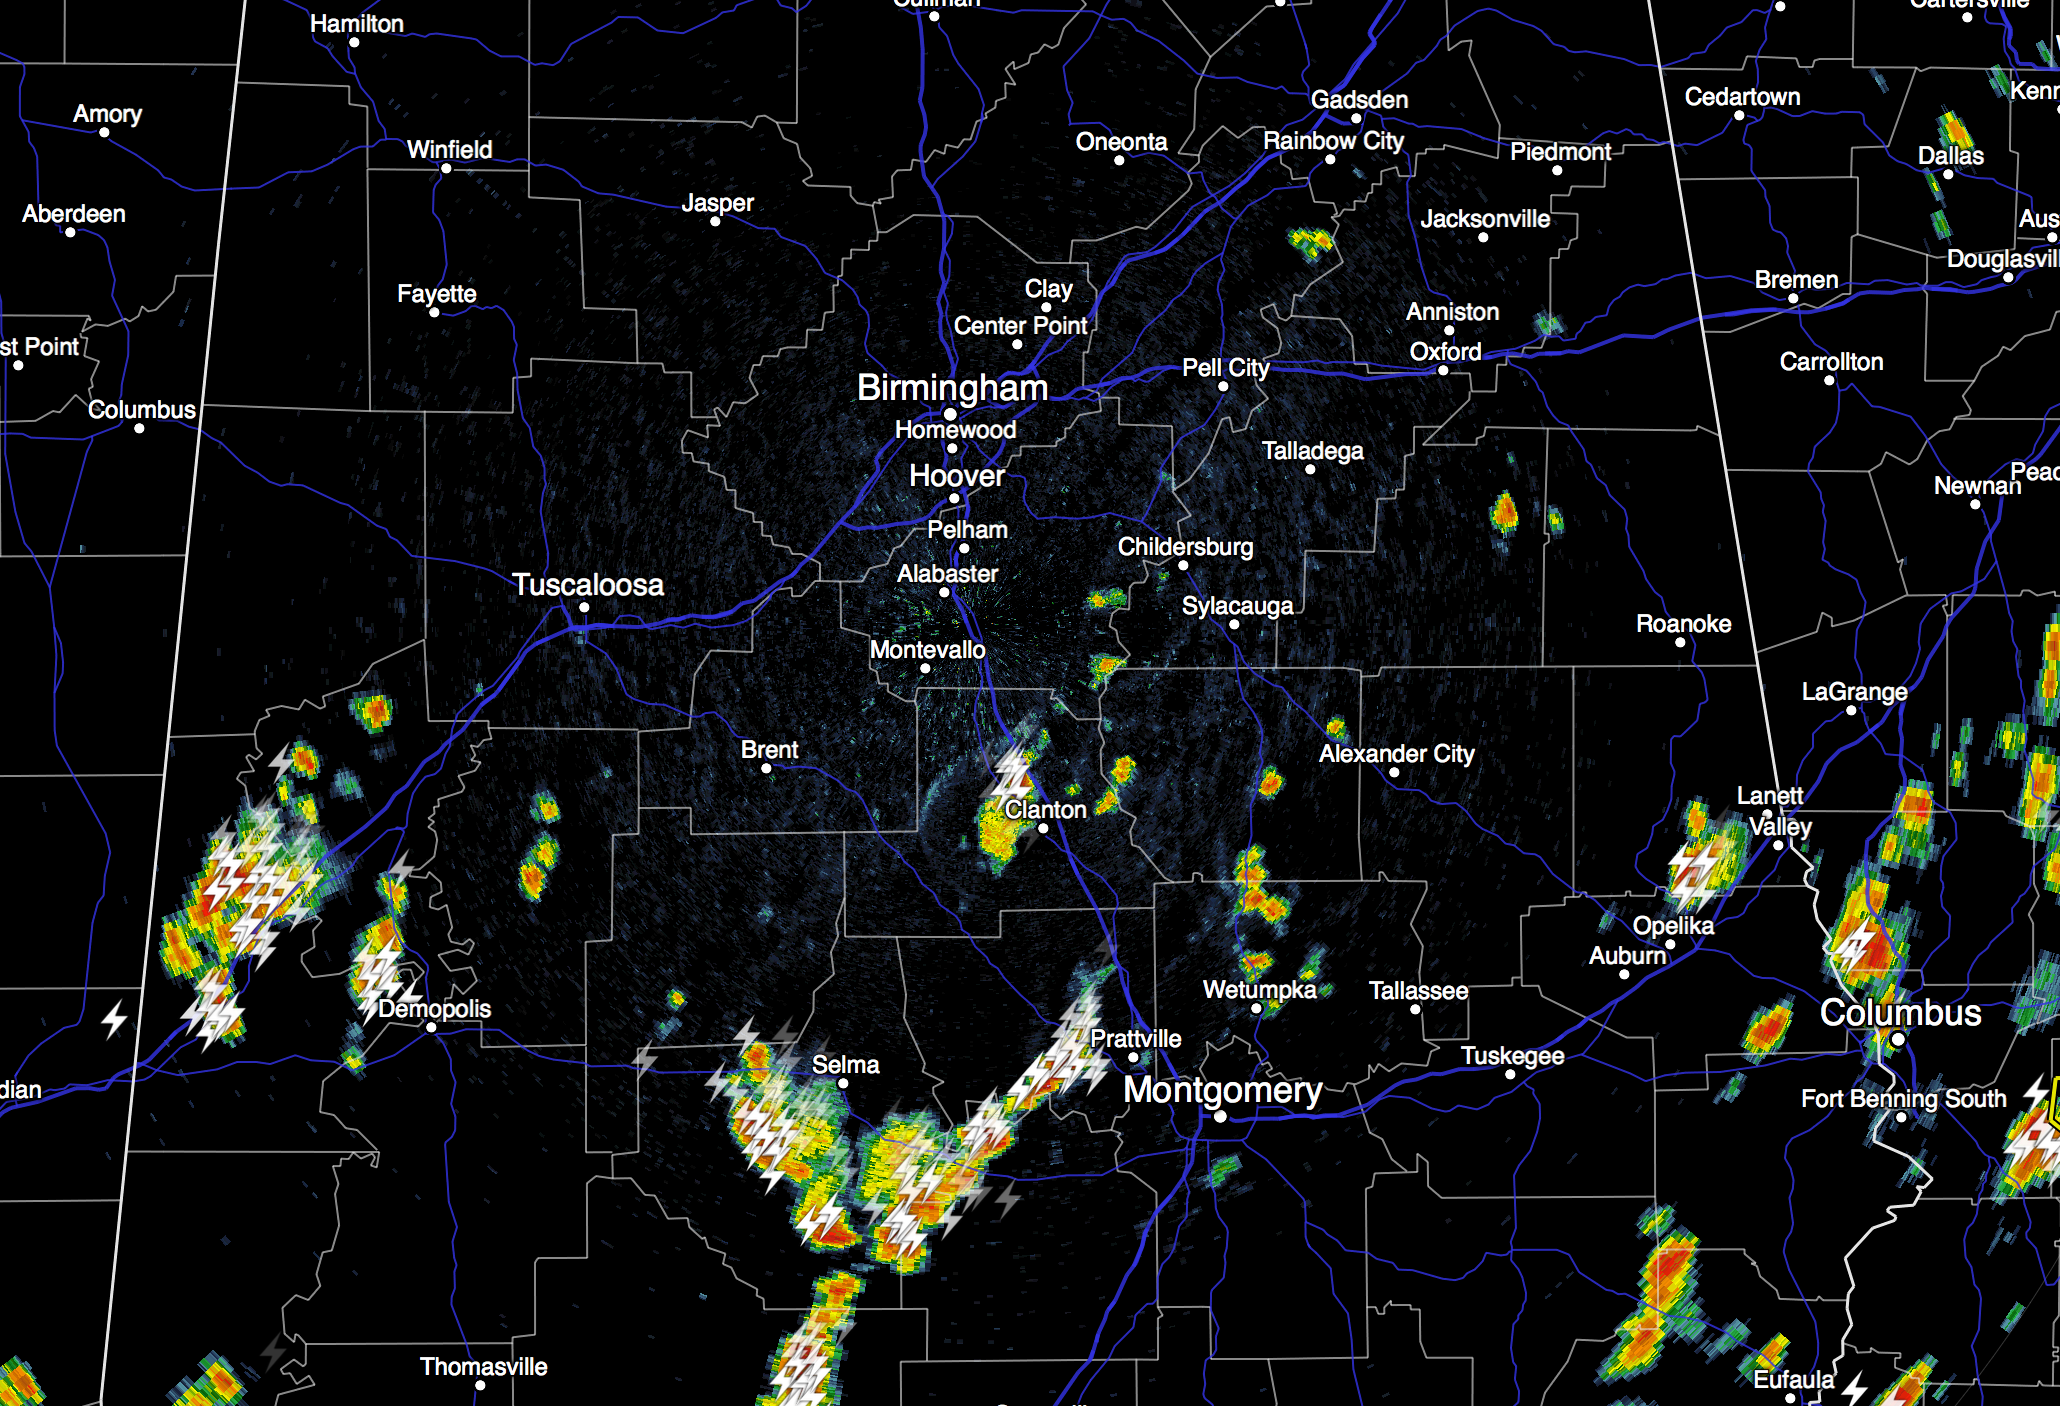 Showers/Storms South Of I-20